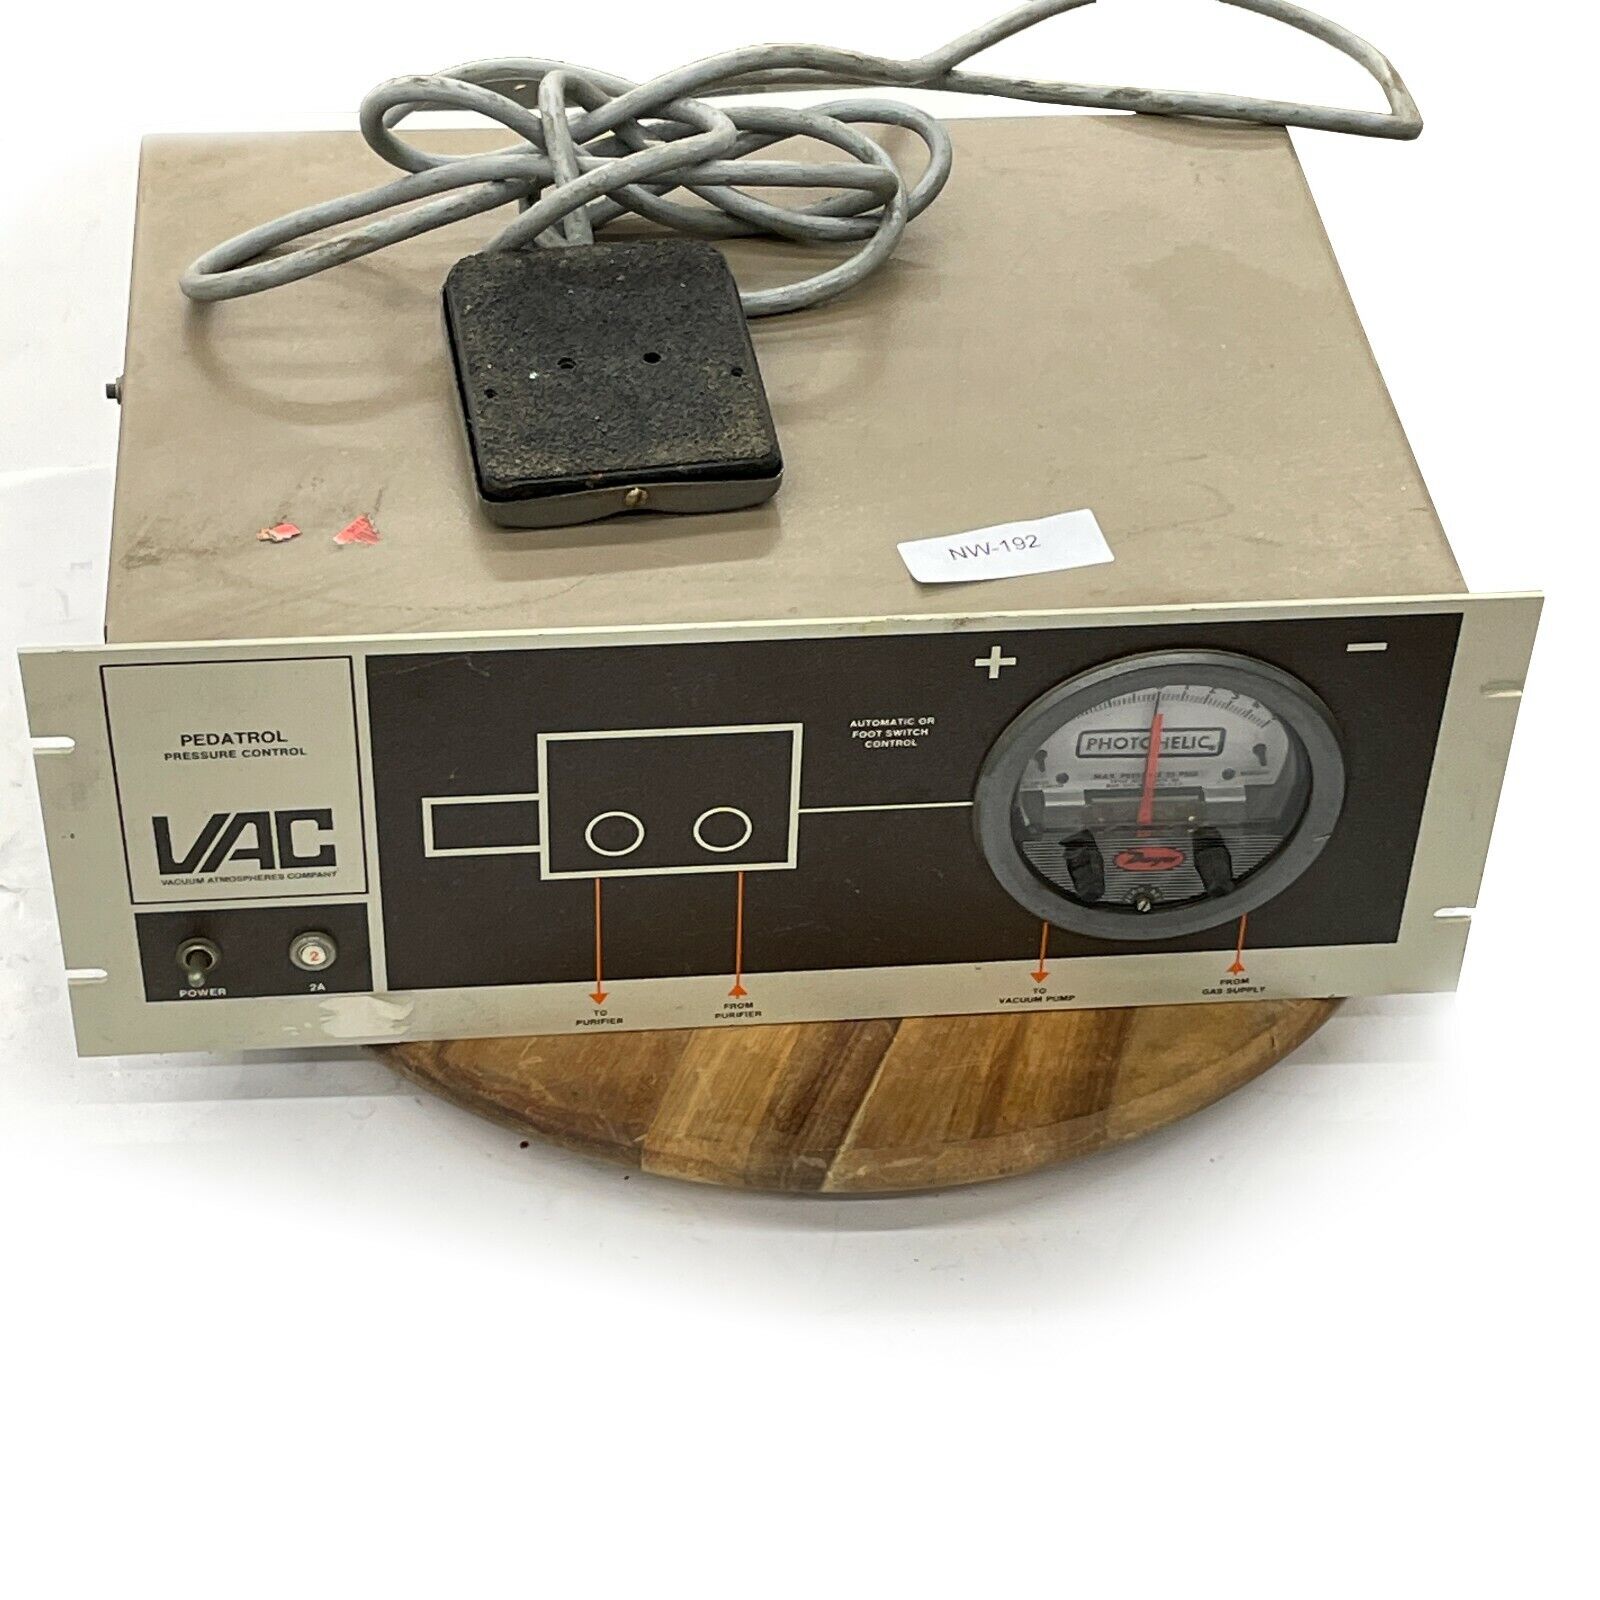 VAC HE-493 M0-5 Isolation Chamber Pedatrol Pressure Control Unit w/ Footswitch